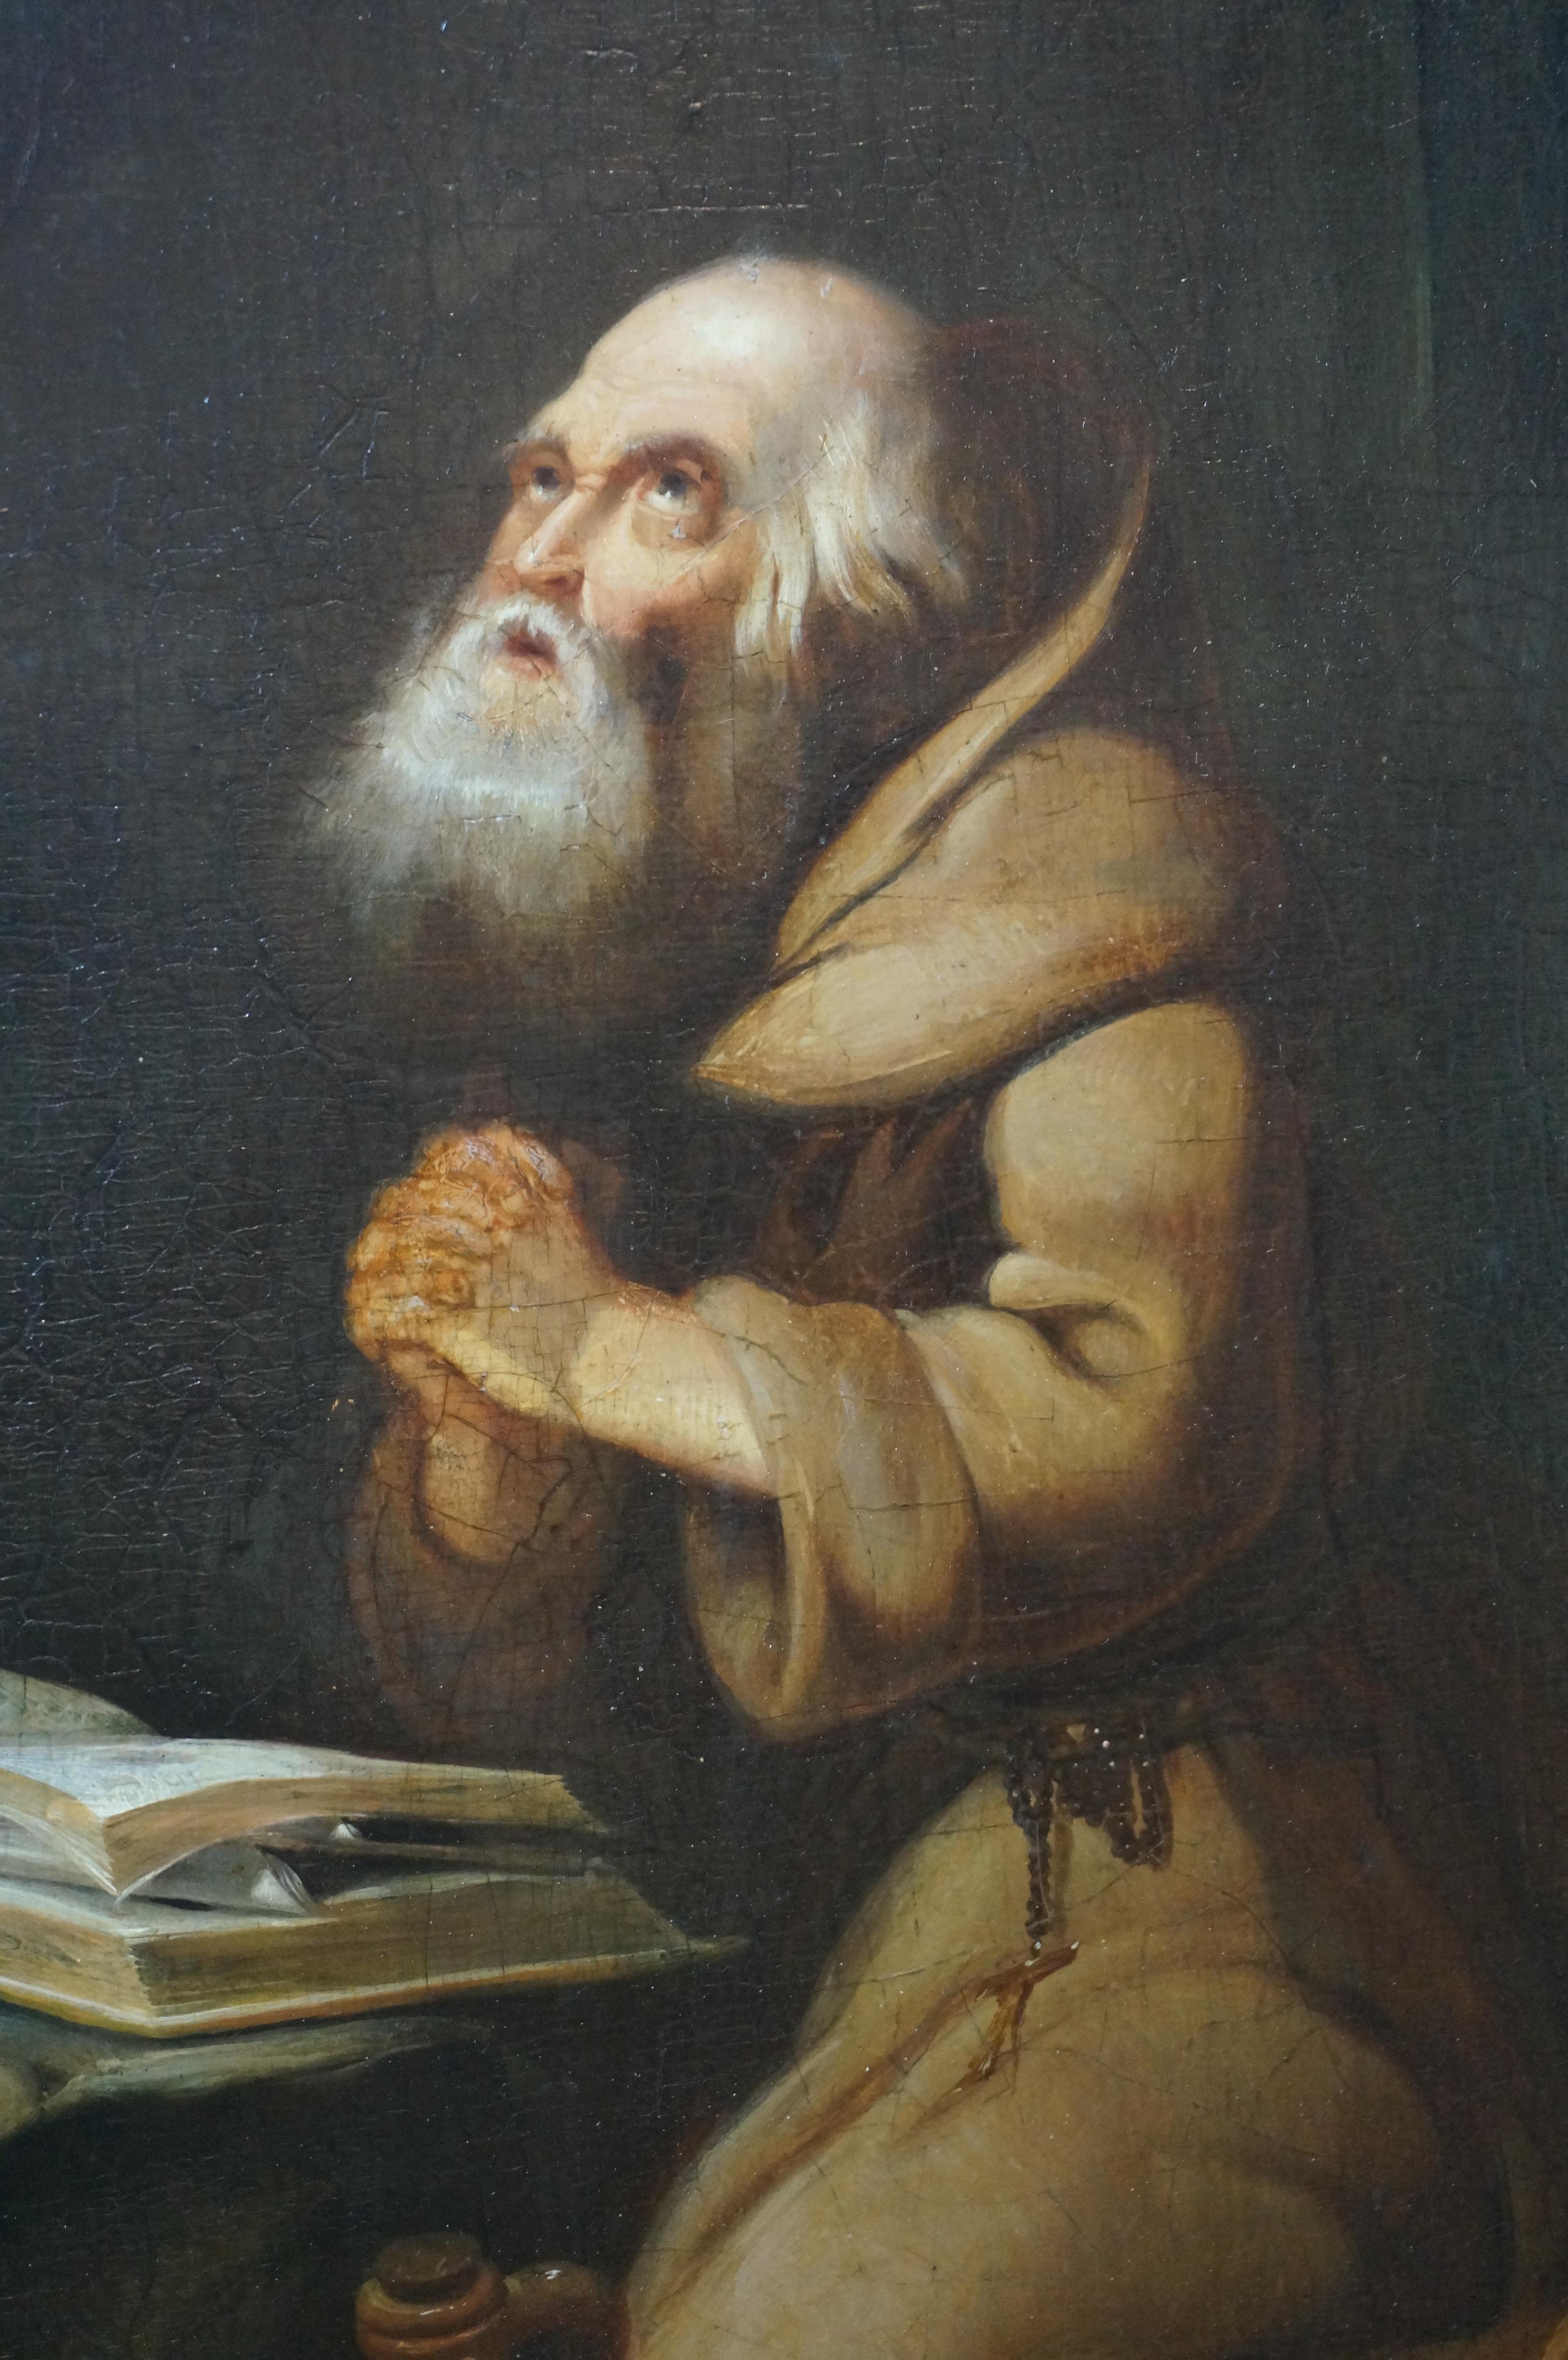 Antique religious painting, Praying hermit, oil on panel, Dutch golden age 5